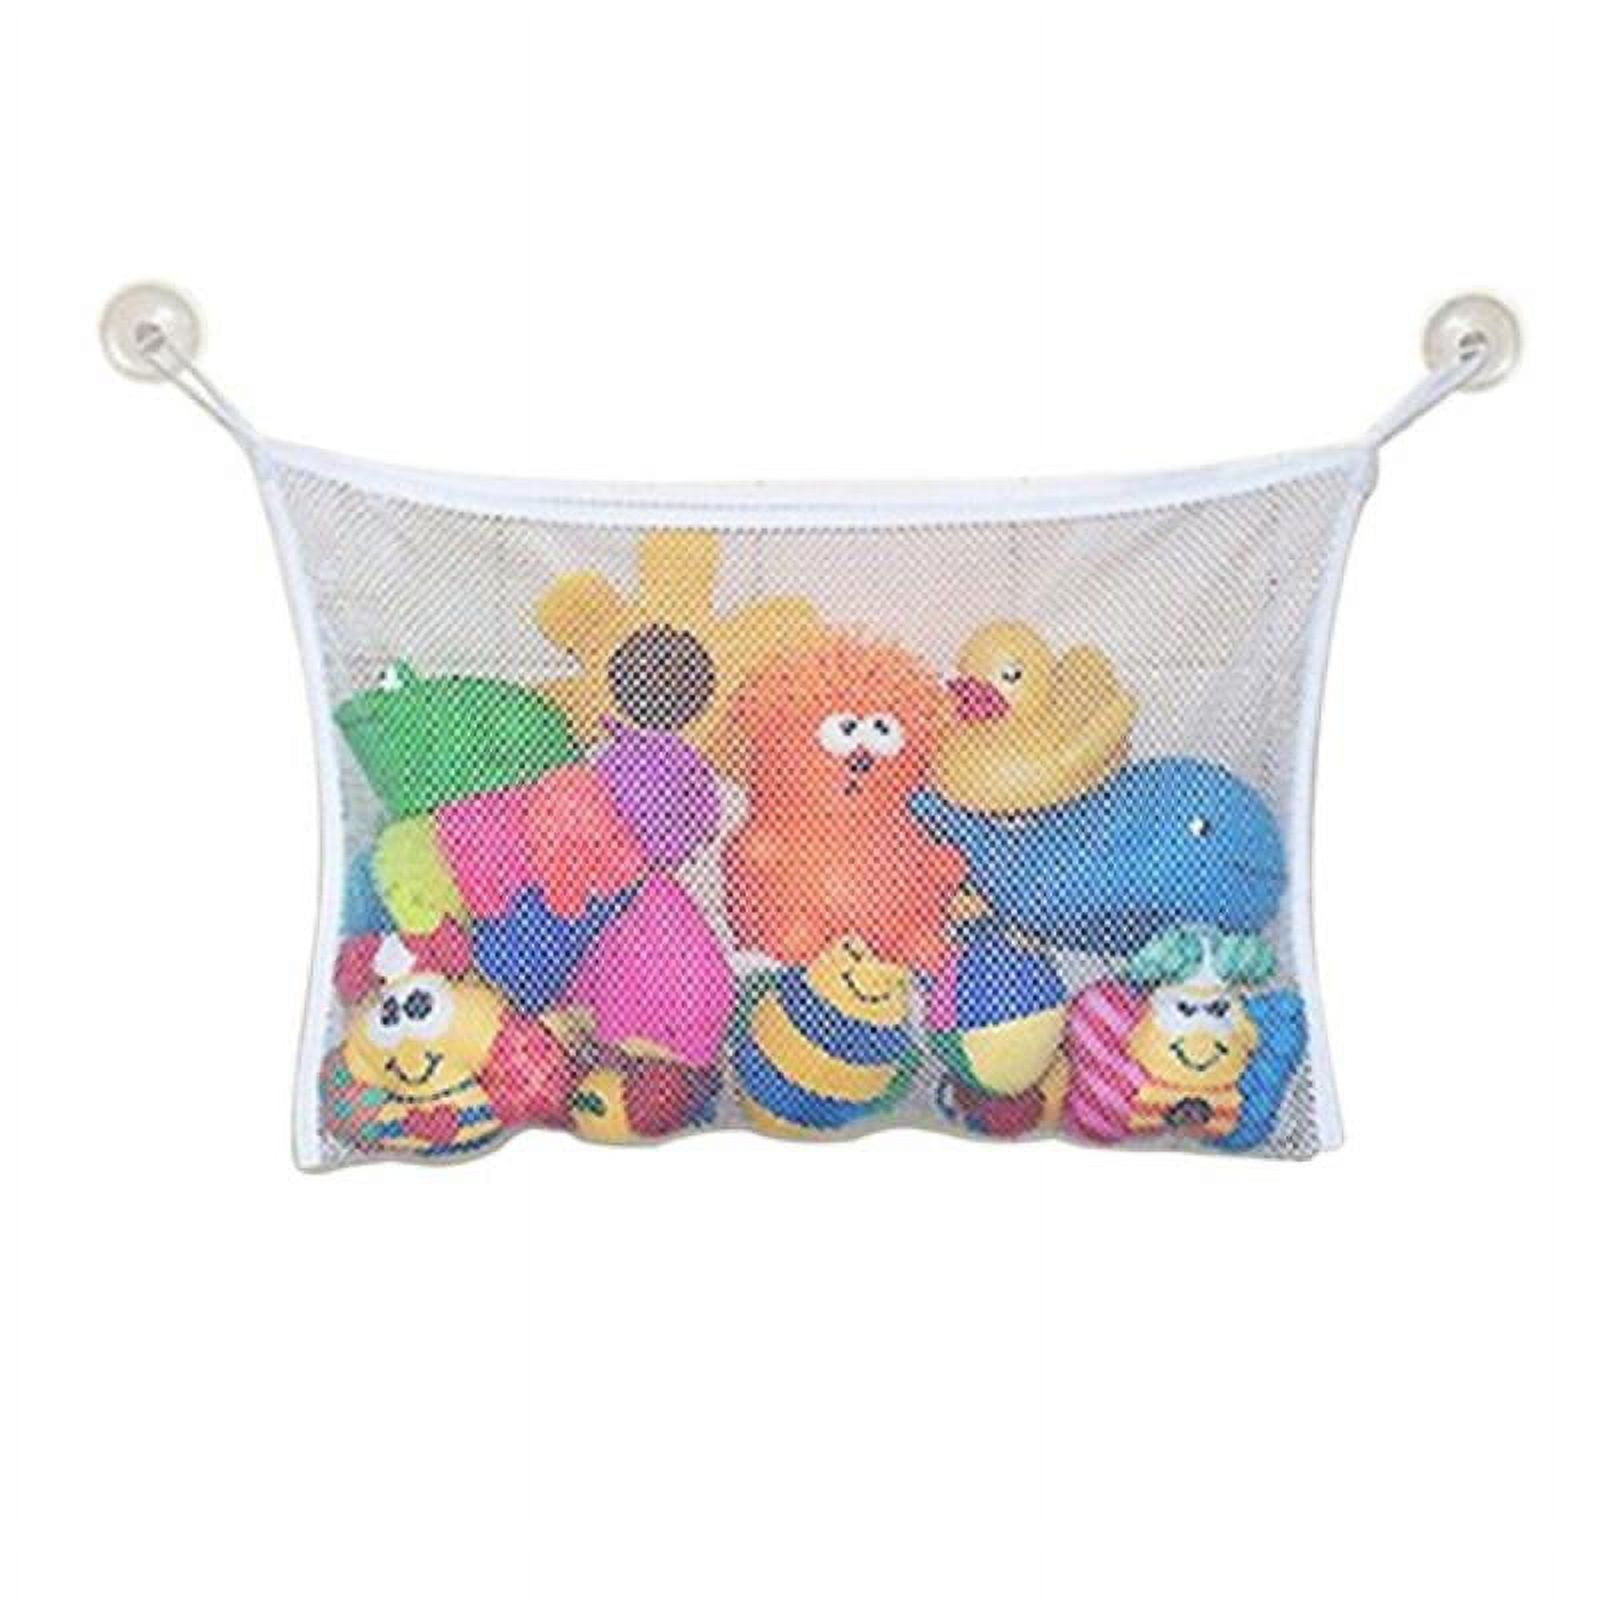 2 x Mesh Bath Toy Organizer + 6 Ultra Strong Hooks – The Perfect Bathtub  Toy Holder & Bathroom or Shower Caddy – These Multi-use Net Bags Make Baby